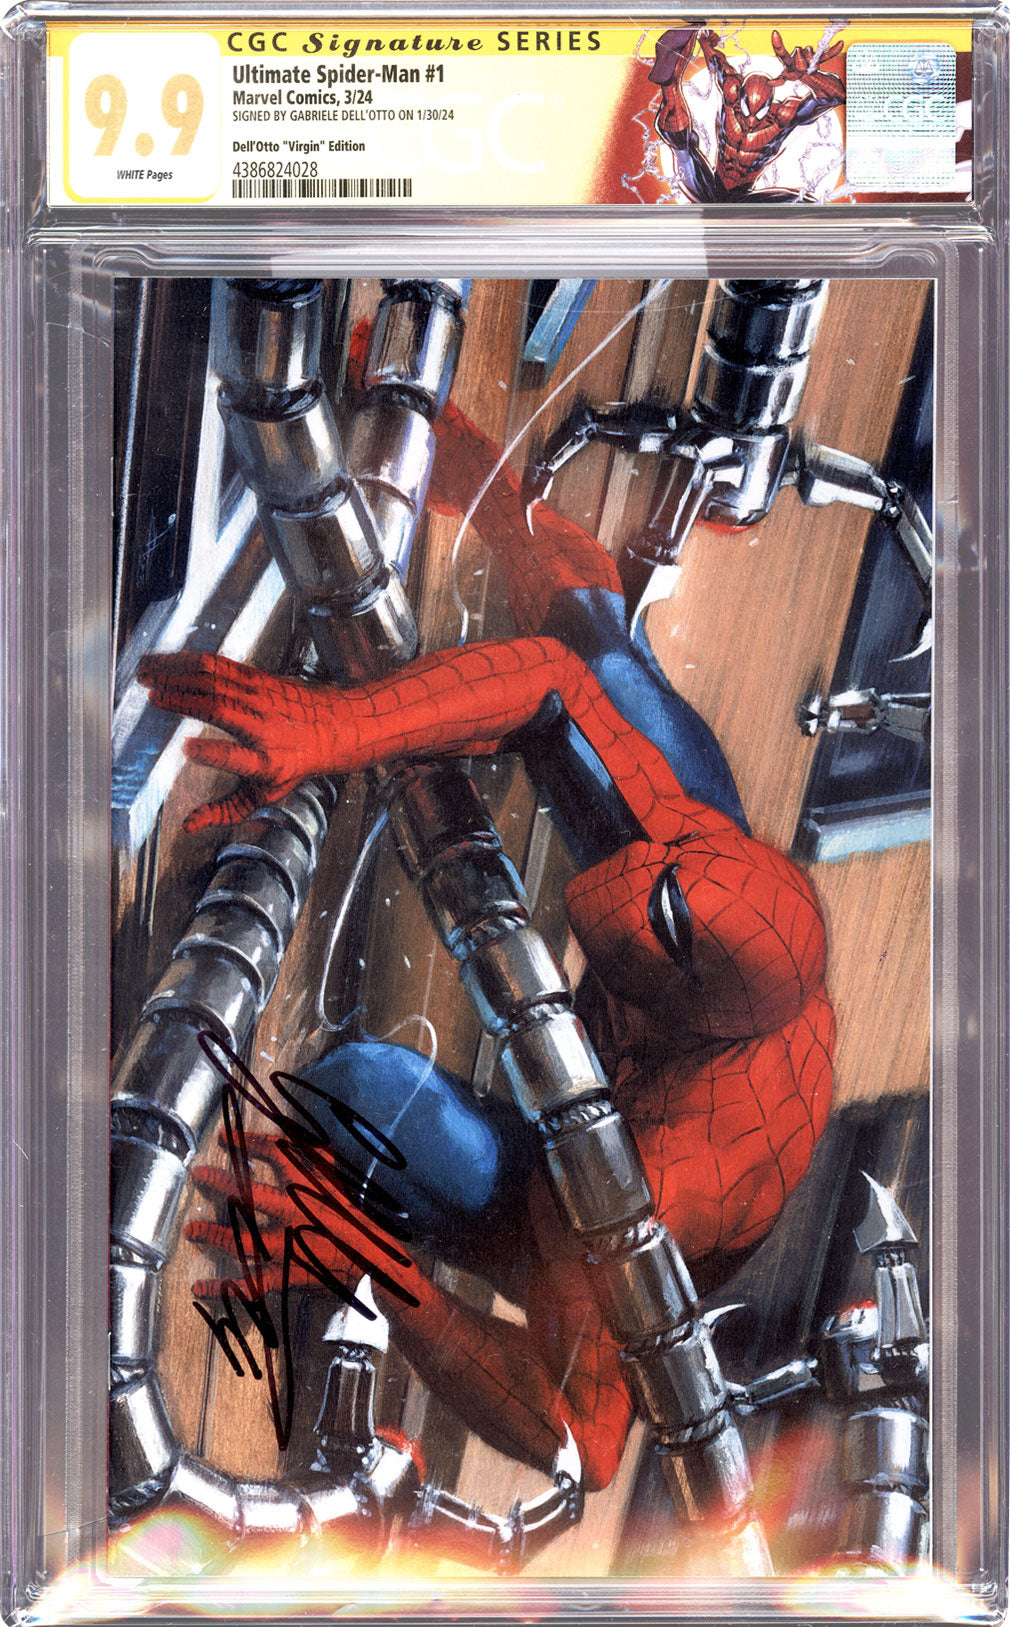 Ultimate Spider-Man #1 Gabriele Dell'Otto CGC SS 9.9 (Virgin Edition) | Slab of The Day – April 9